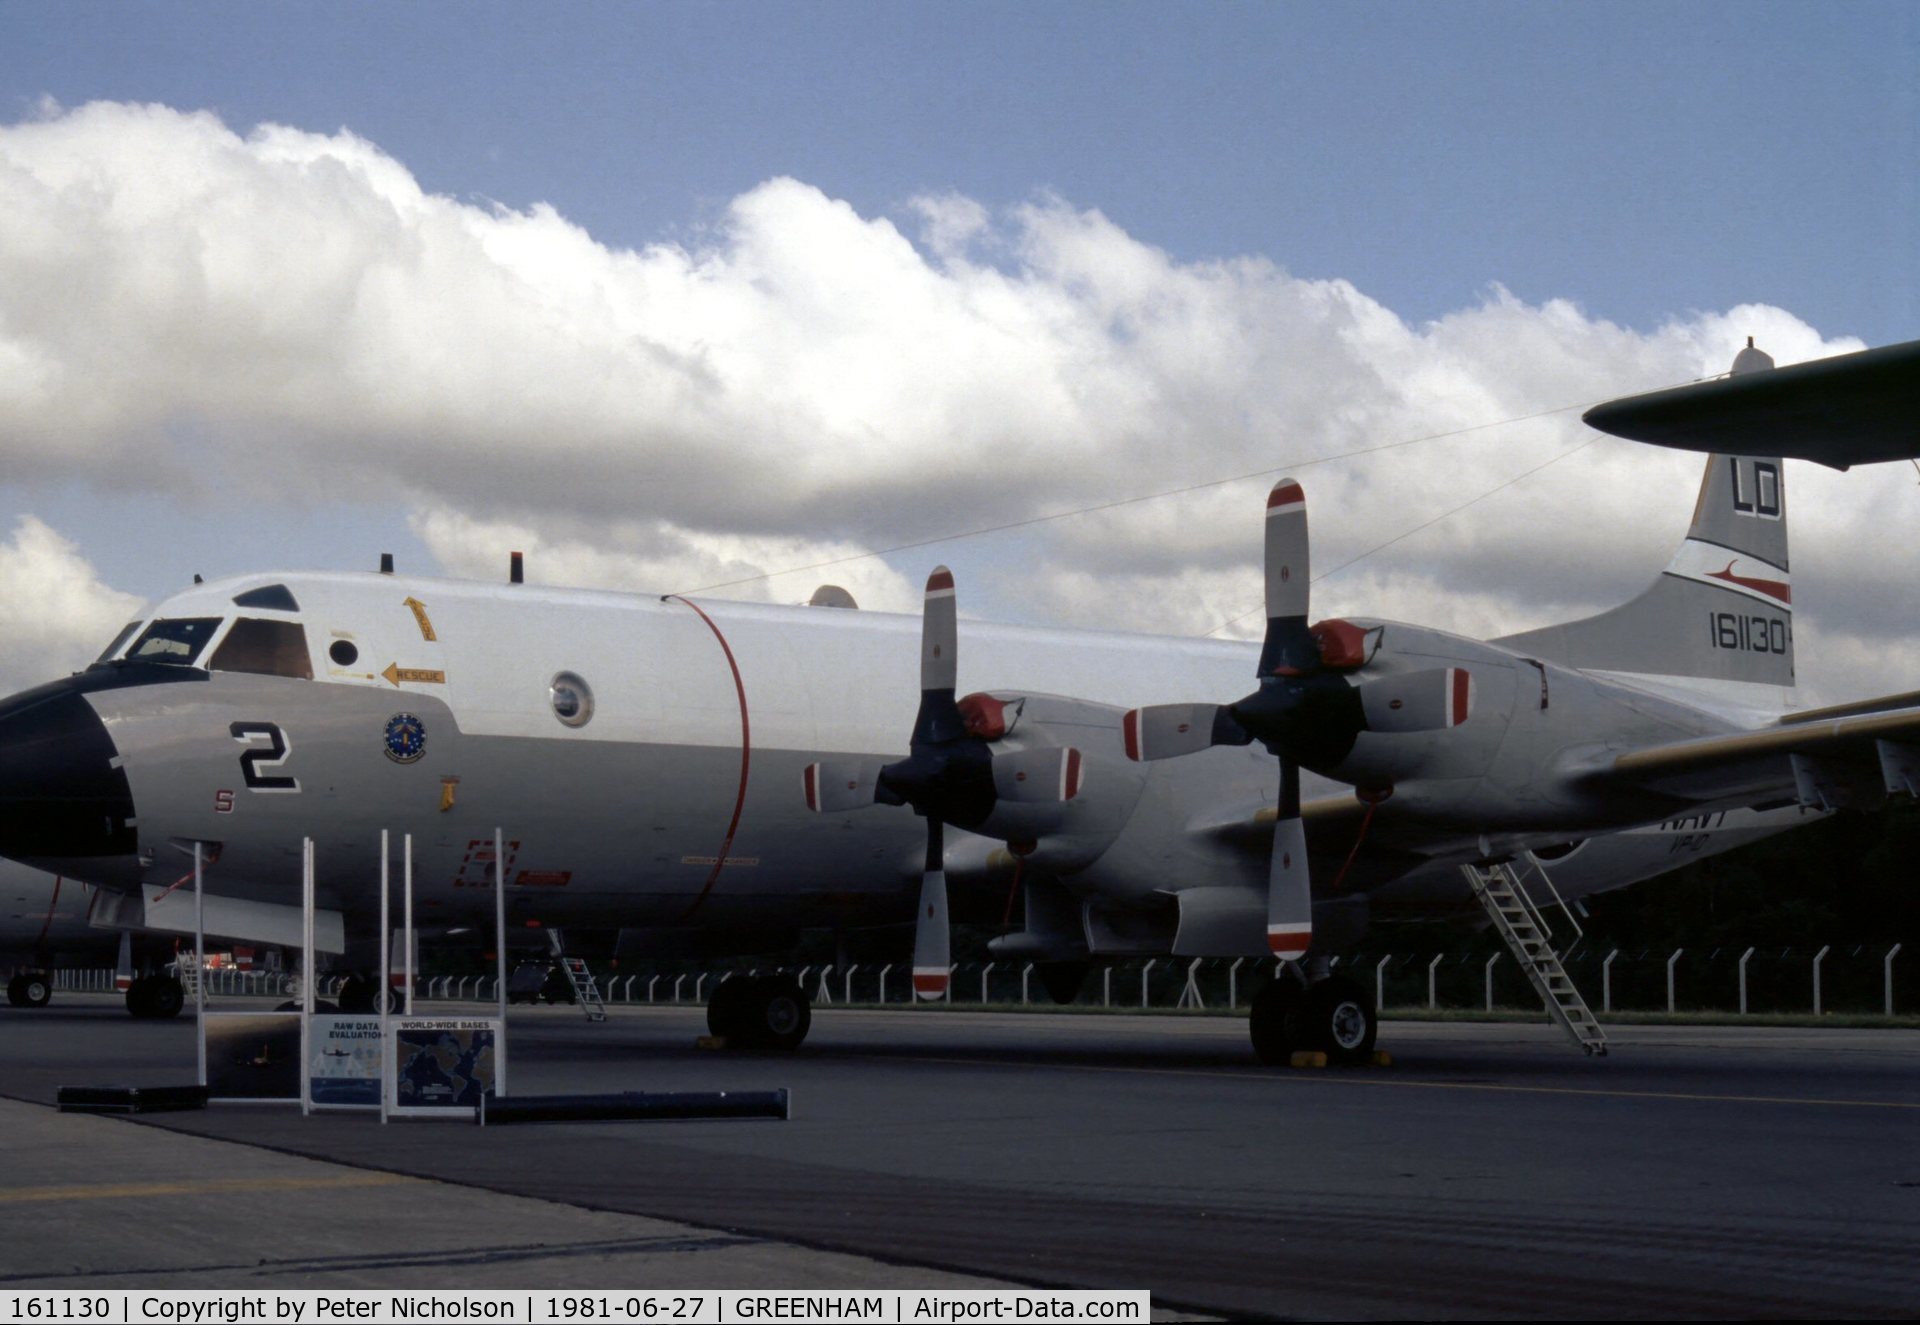 161130, Lockheed P-3C Orion C/N 285A-5718, P-3C Orion of Patrol Squadron VP-10 on display at the 1981 Intnl Air Tattoo at RAF Greenham Common.